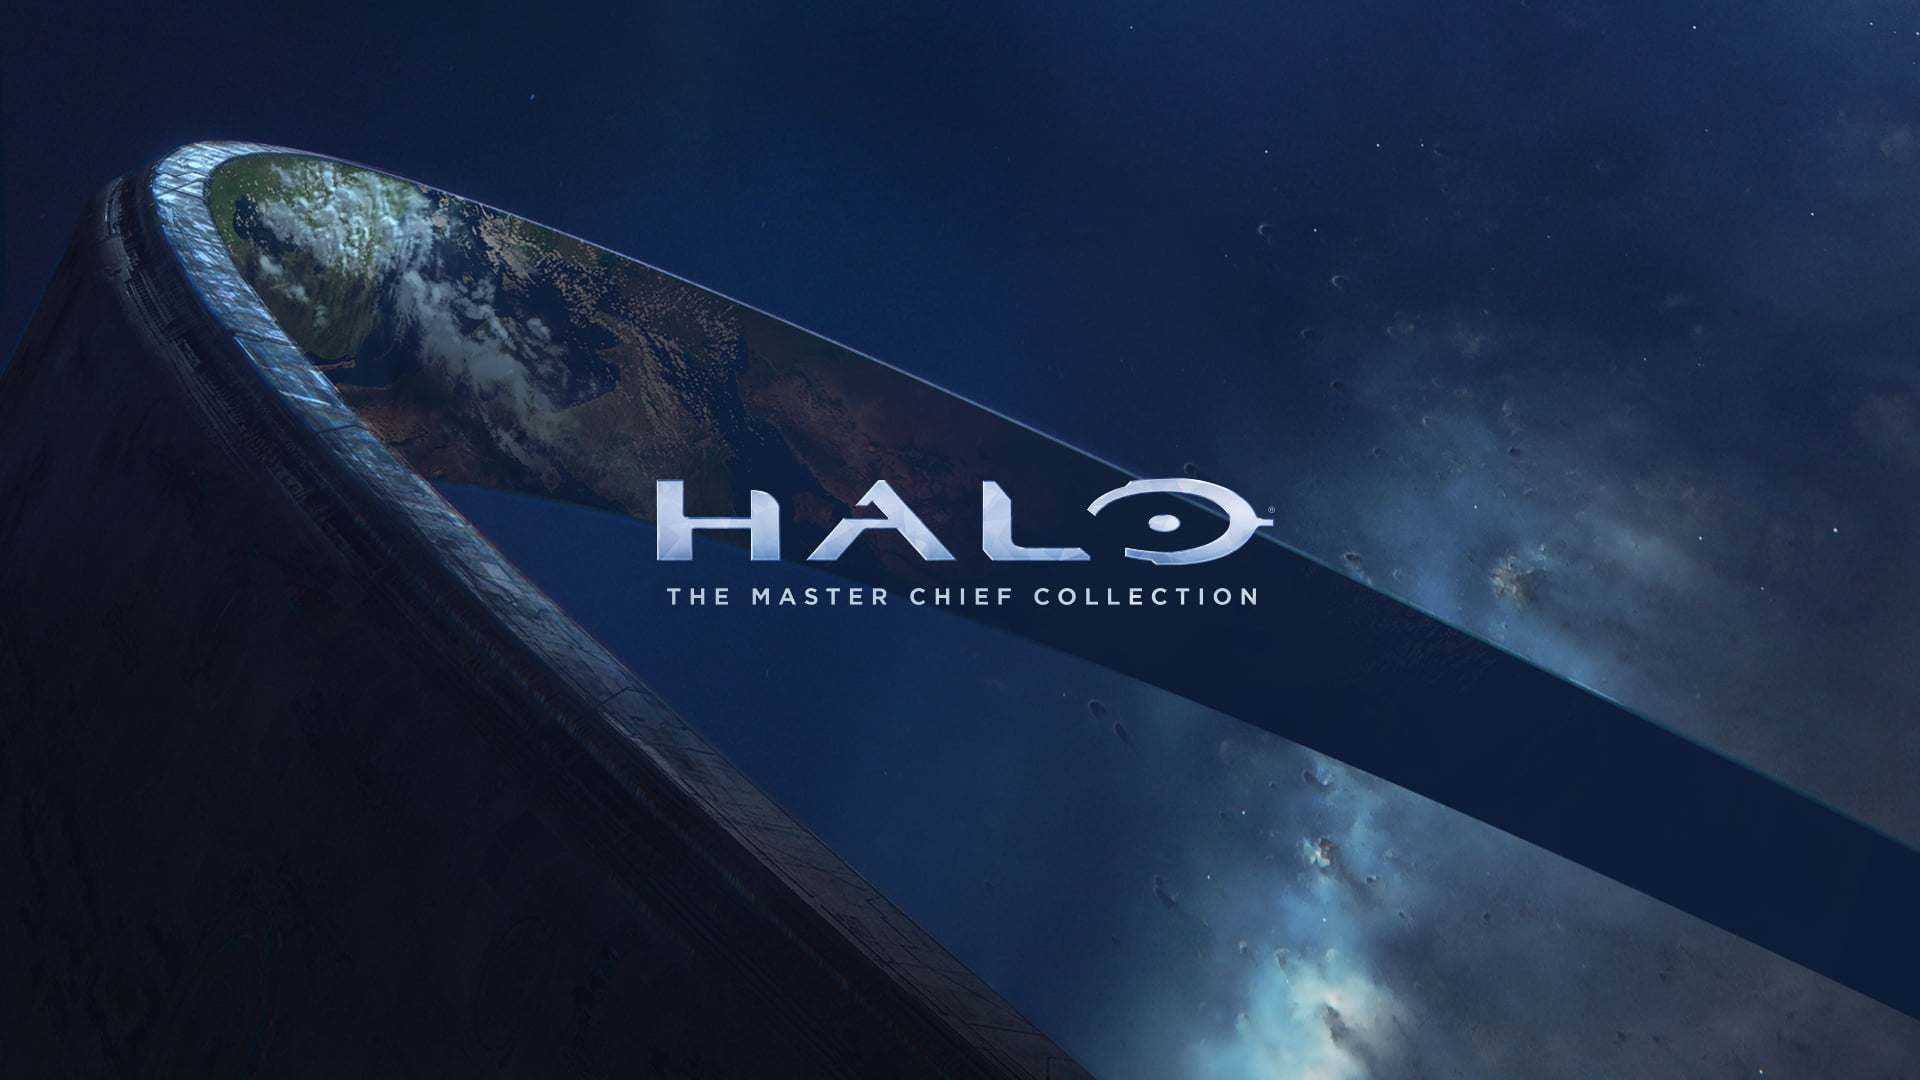 Halo The Master Chief collection digital wallpaper, Halo: Master Chief Collection, video games, Halo, Halo 3